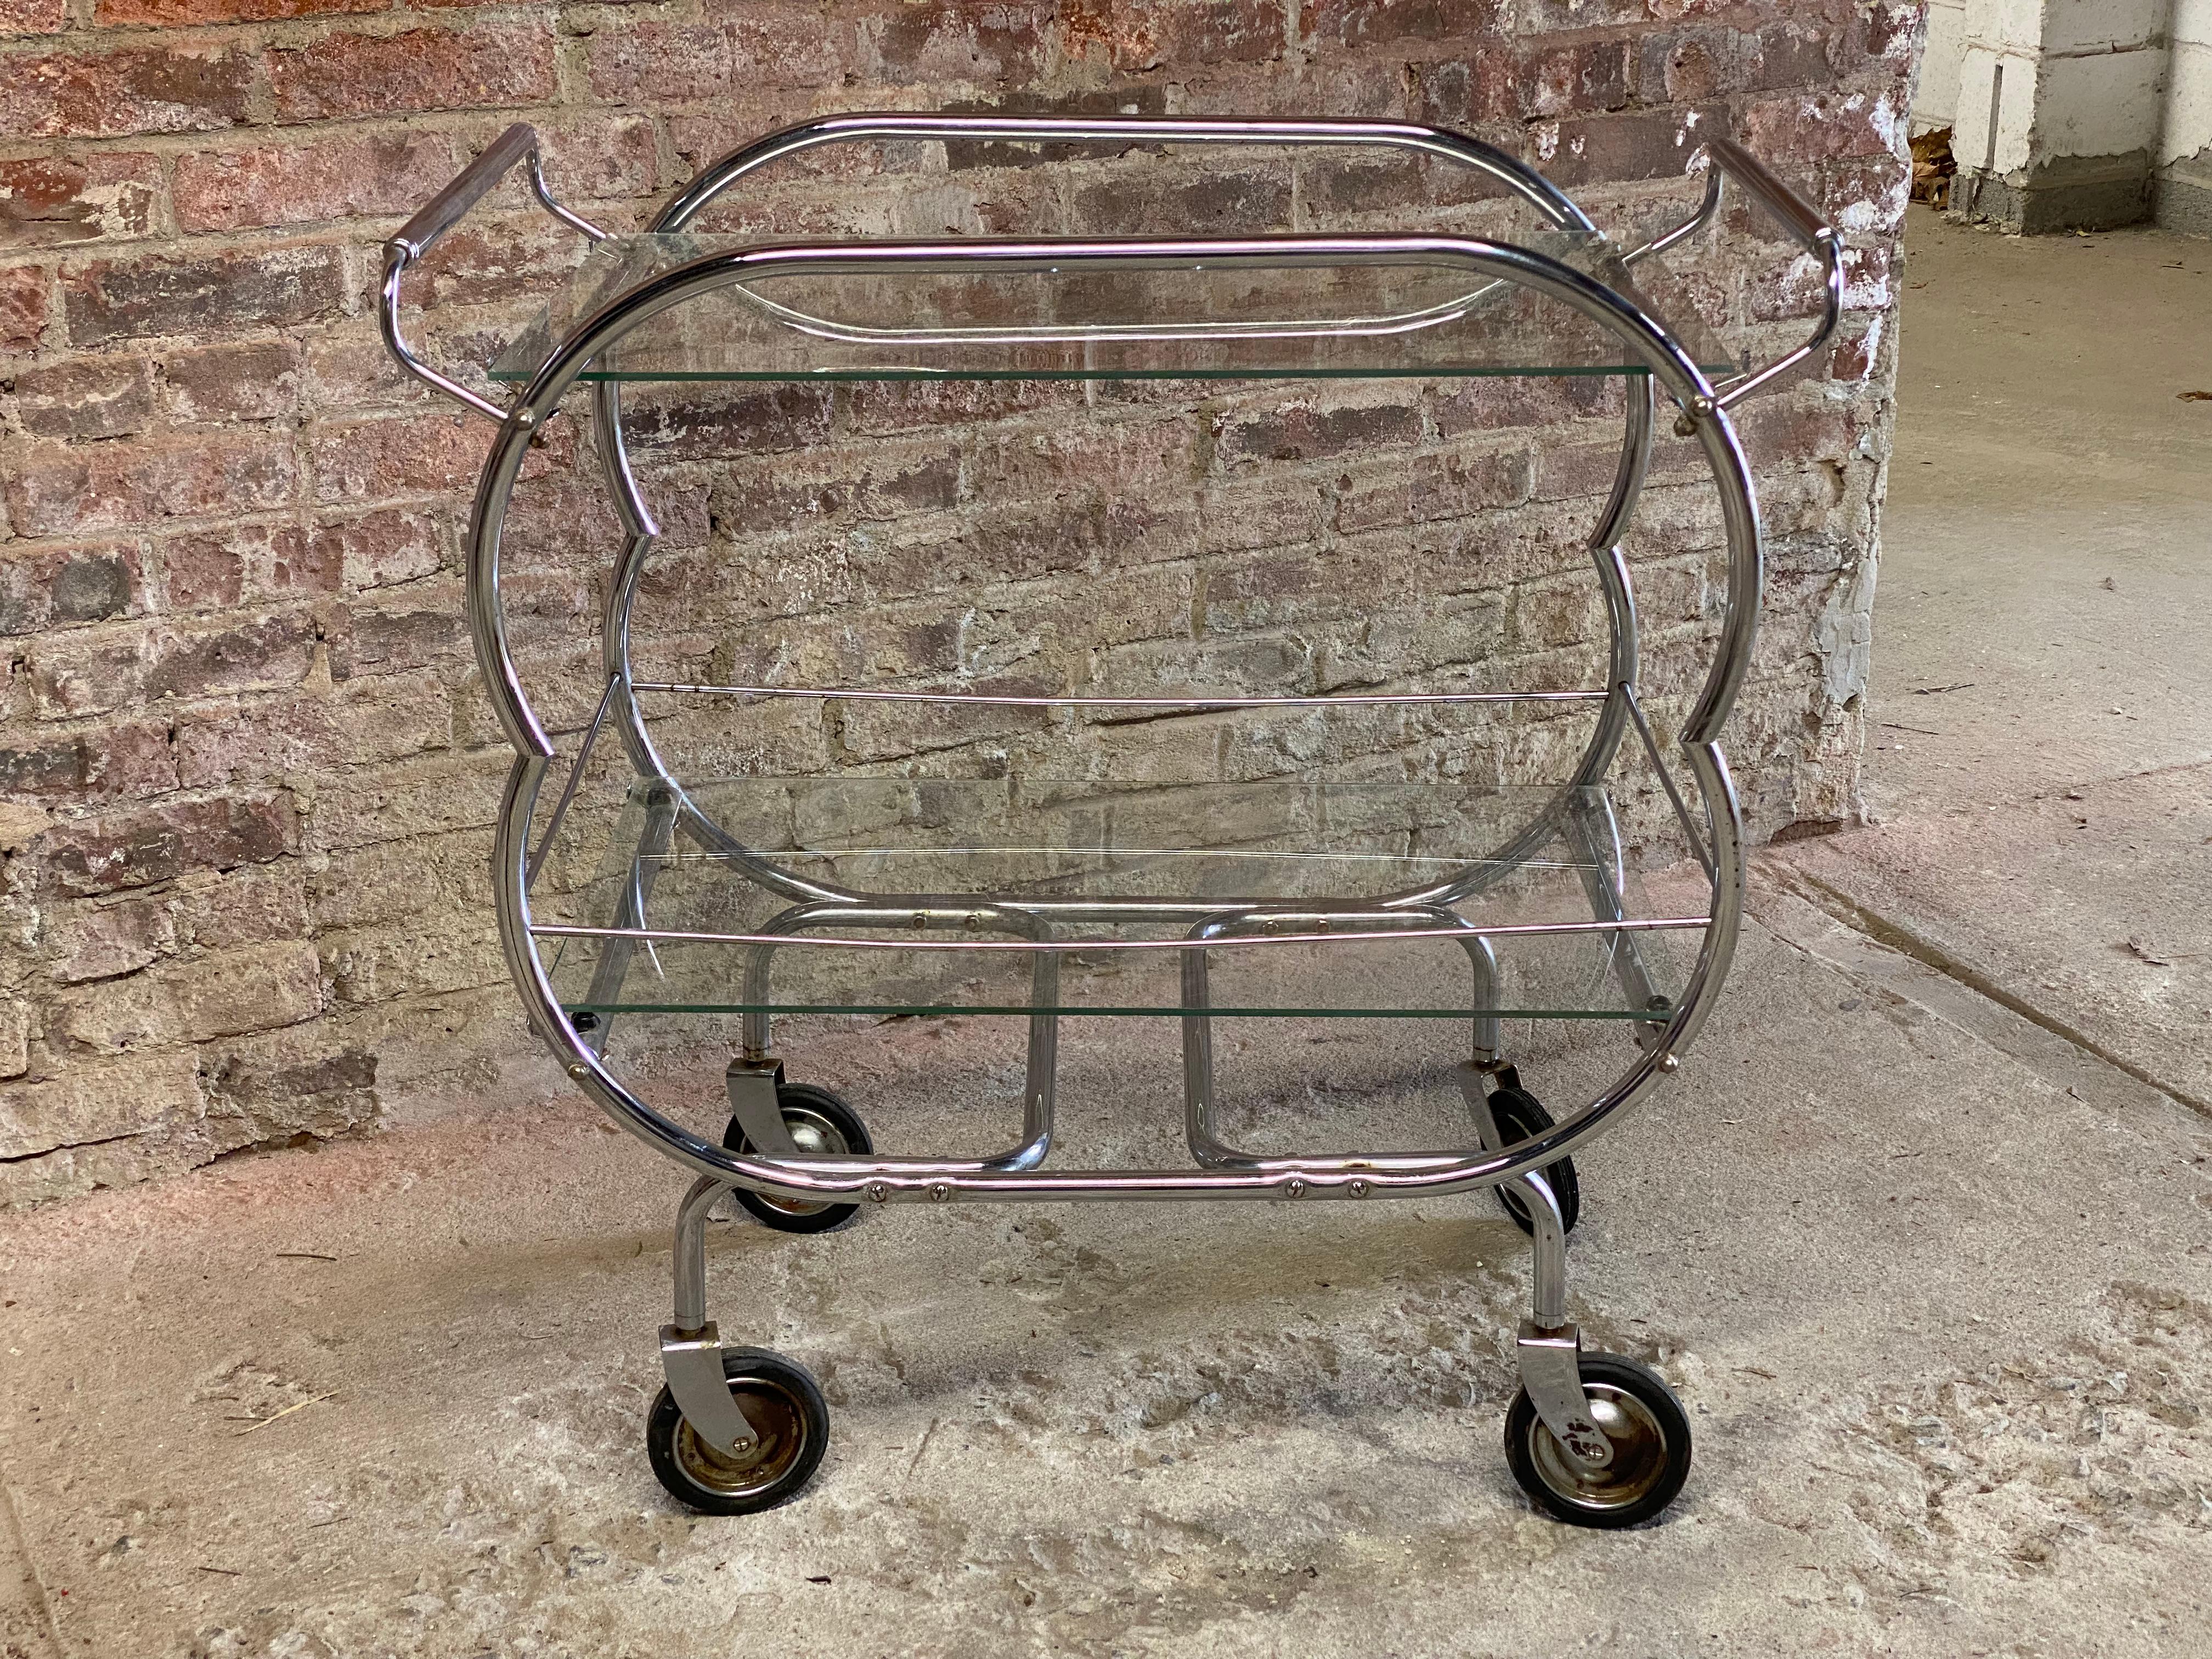 Excellent tubular chrome with glass shelves bar cart. Hard rubber wheels. Curvy bright chrome structure with two glass shelves. Circa 1920-30. Good overall condition with some light rusting and pitting. Structurally sound and sturdy. Some small